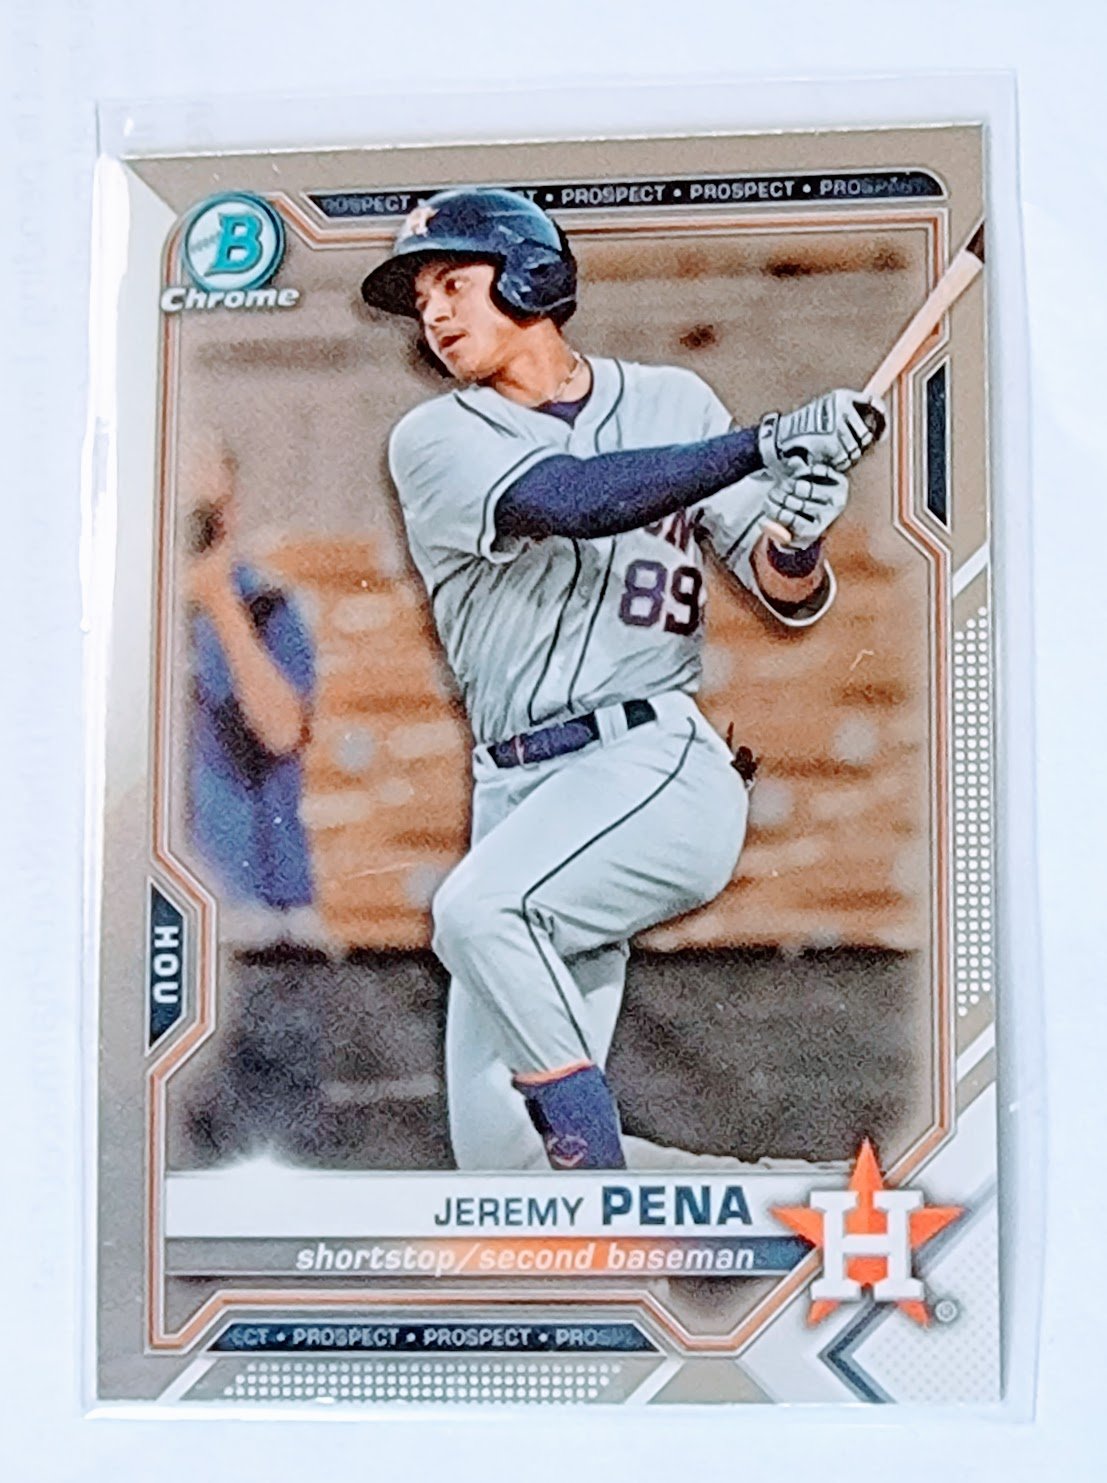 2021 Bowman Chrome Jeremy Pena Prospects Baseball Trading Card SMCB1 simple Xclusive Collectibles   